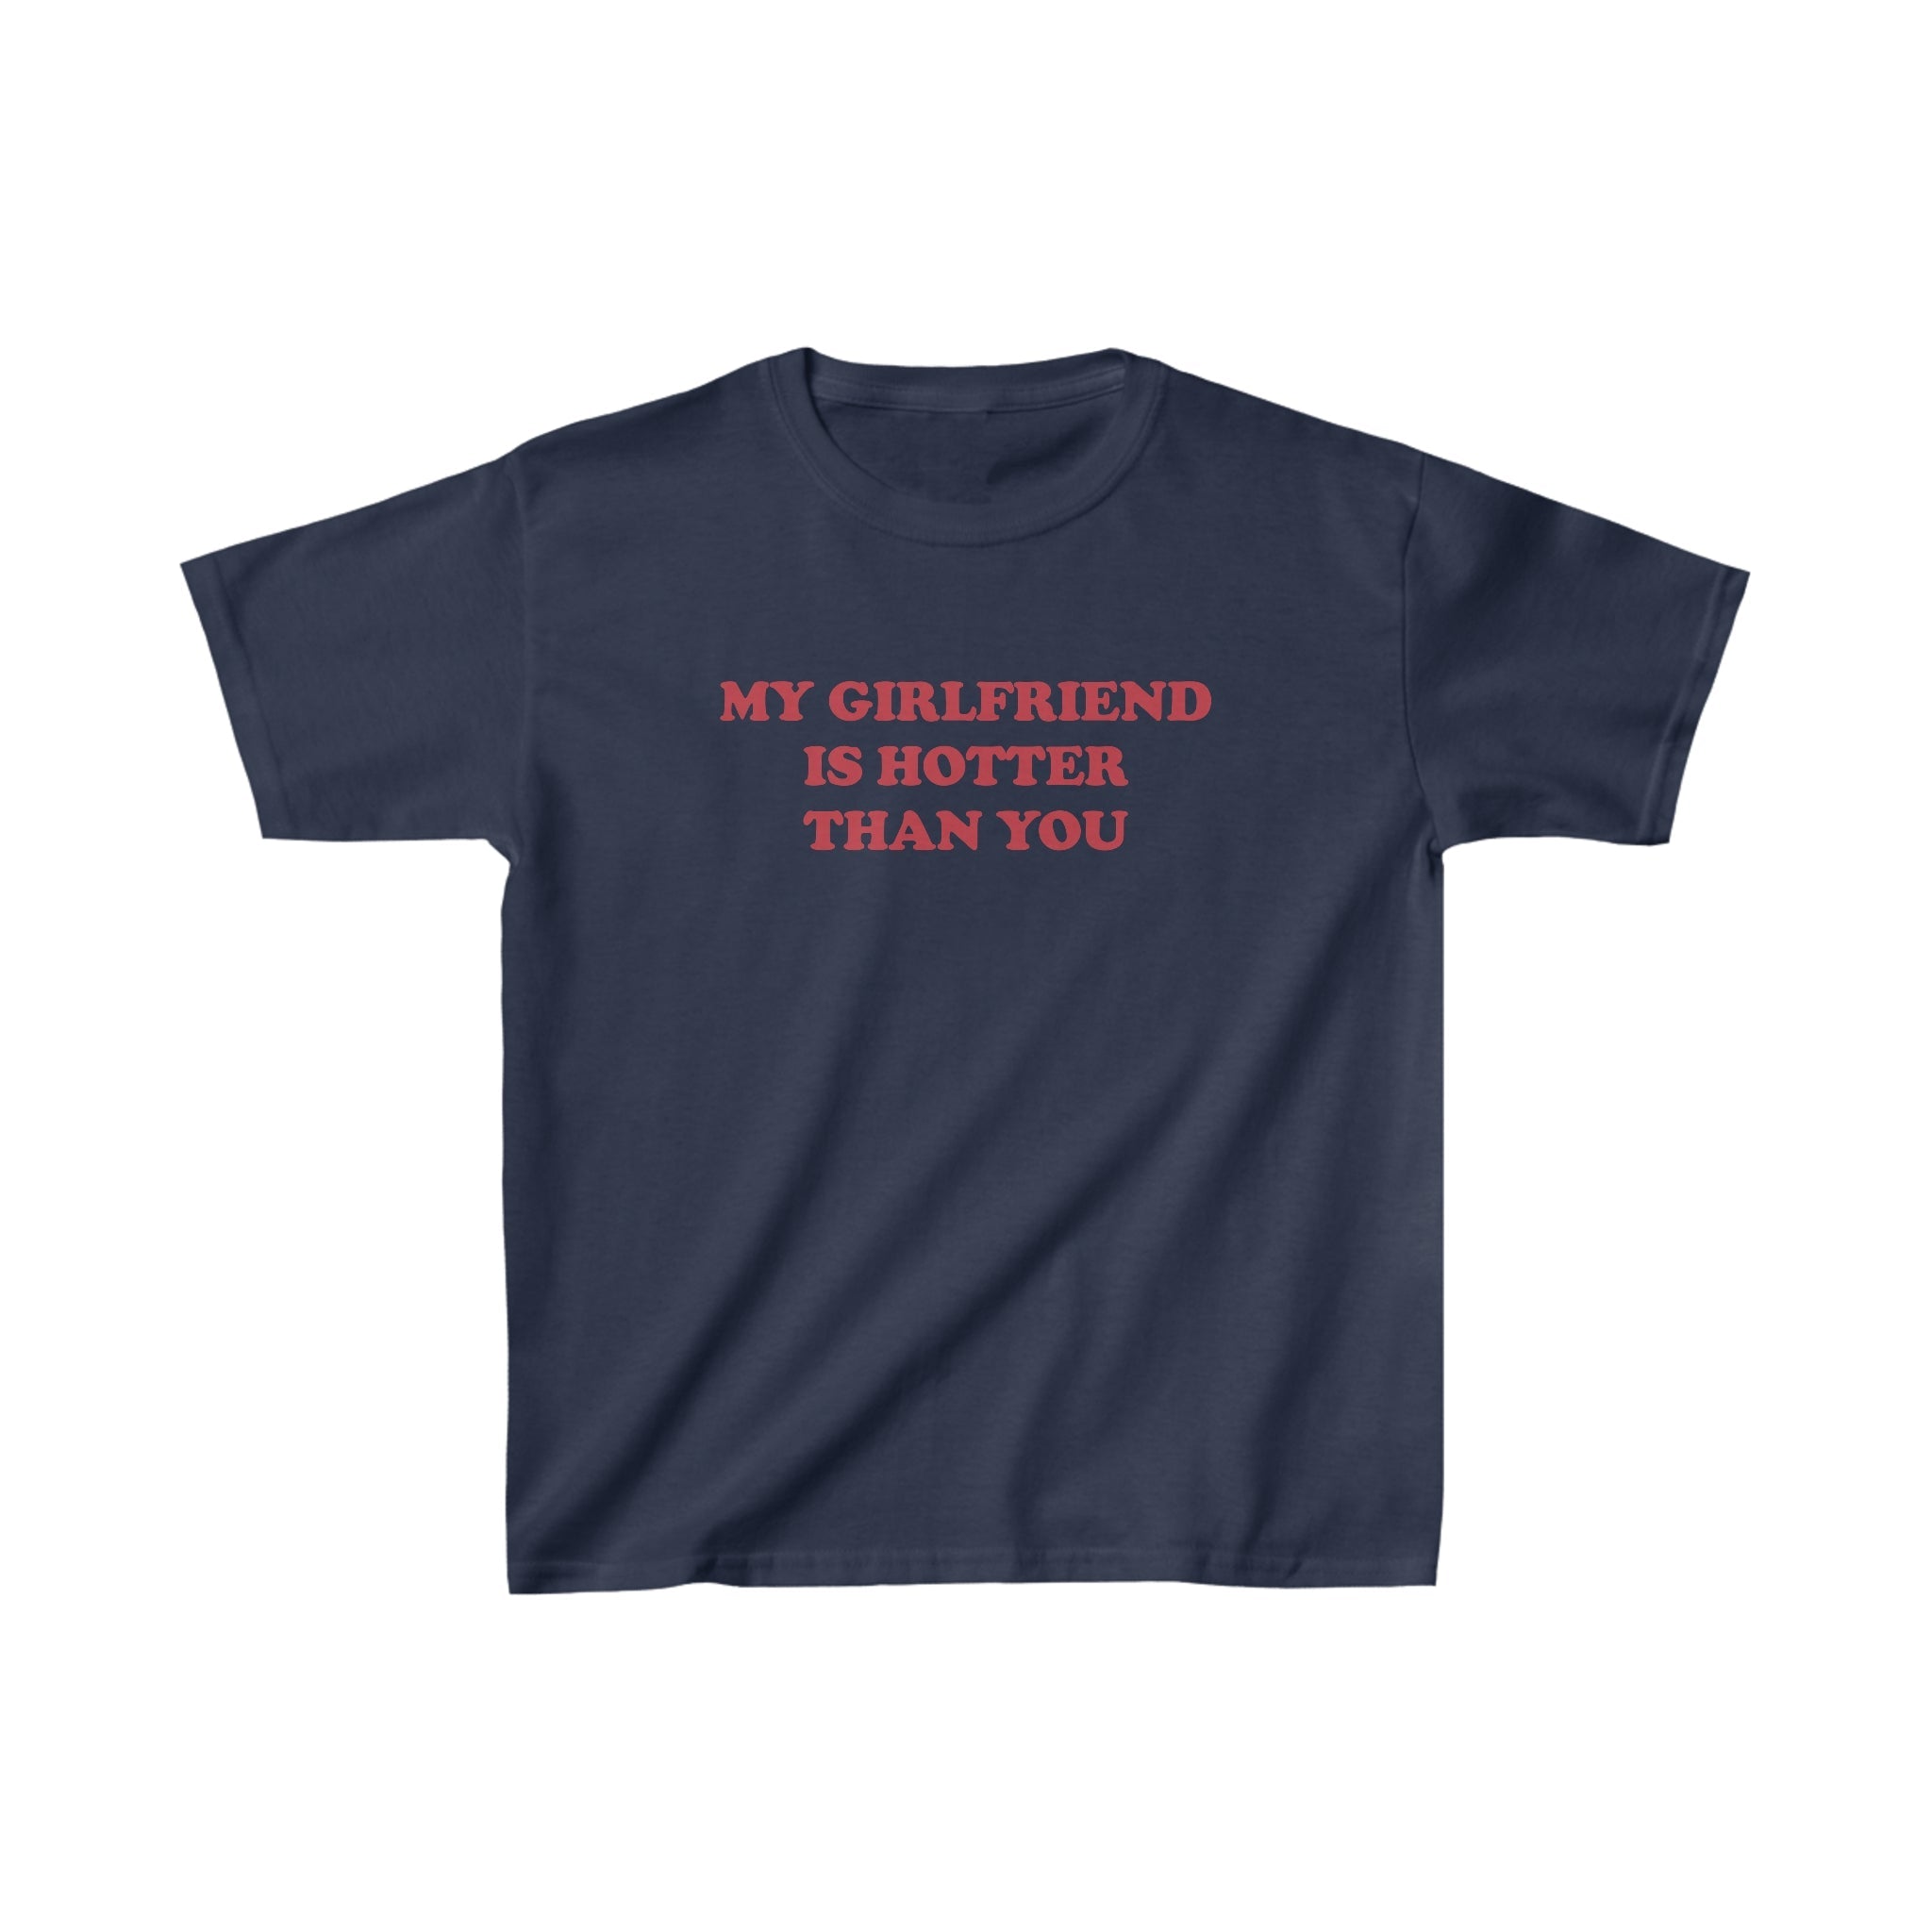 'My Girlfriend is Hotter Than You' baby tee - In Print We Trust